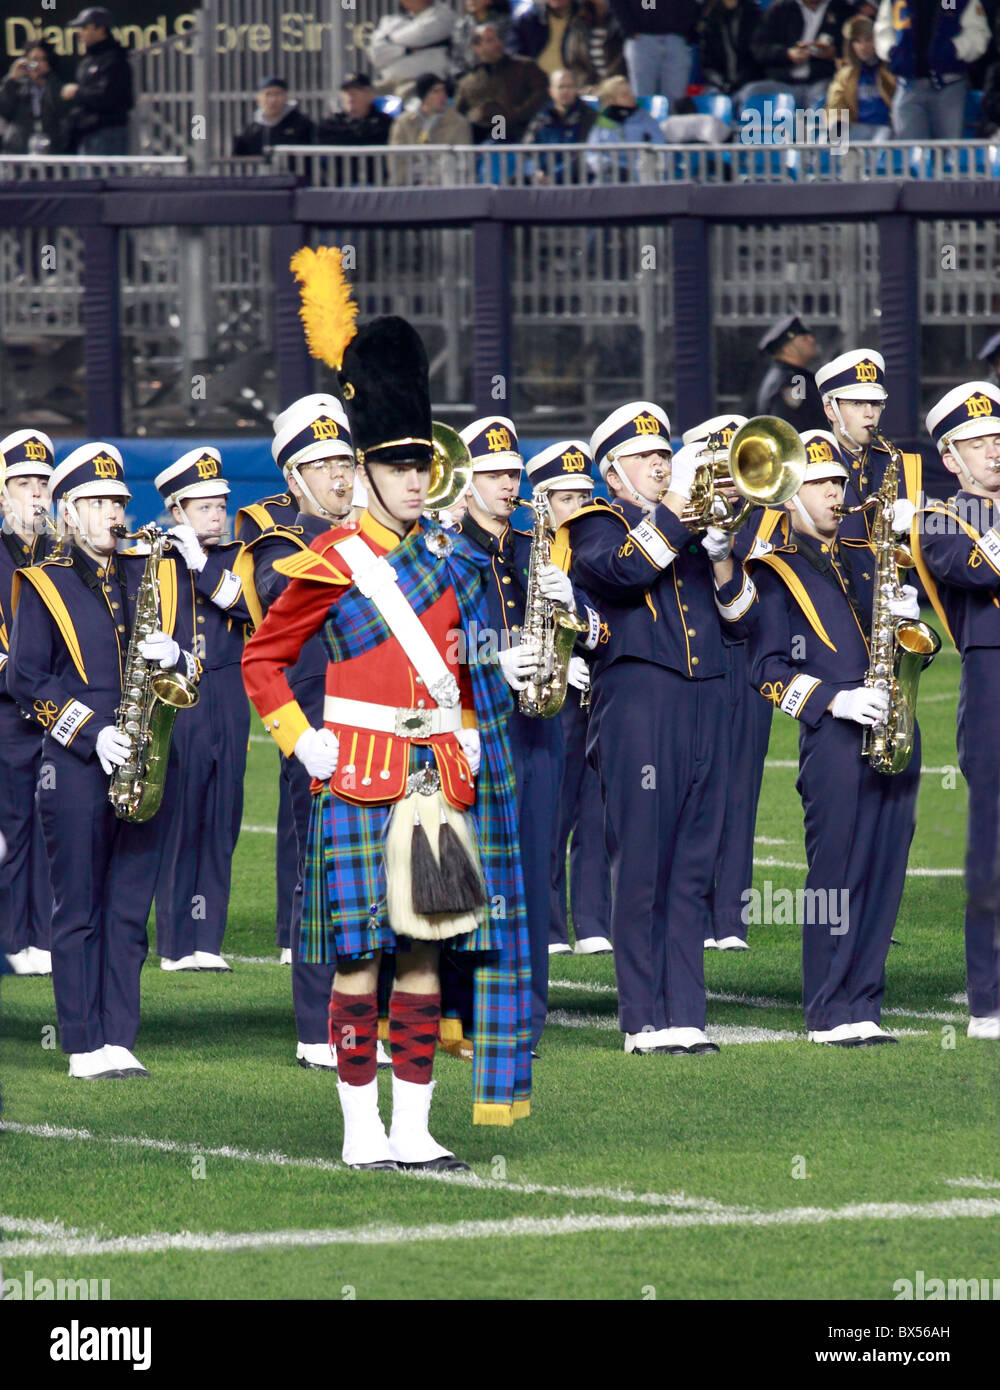 Caroline Lotsbestemming Kalksteen The Notre Dame marching band performs at halftime of the 50th Army vs.  Notre Dame college football game, Yankee Stadium Bronx NY Stock Photo -  Alamy